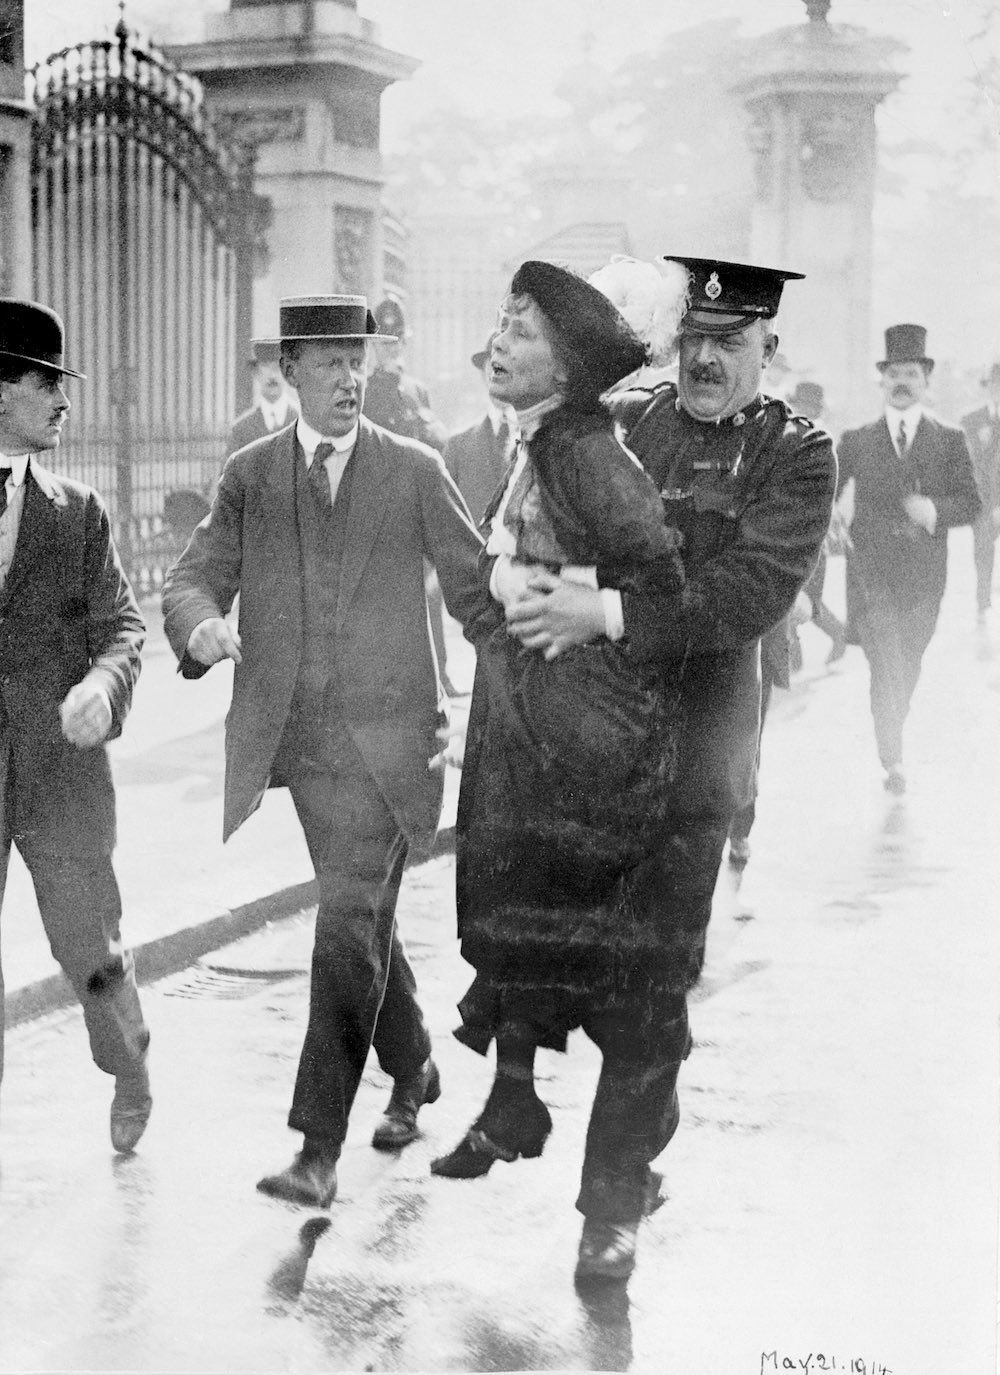 A suffragette being arrested and carried away from her protest, 1914.jpg